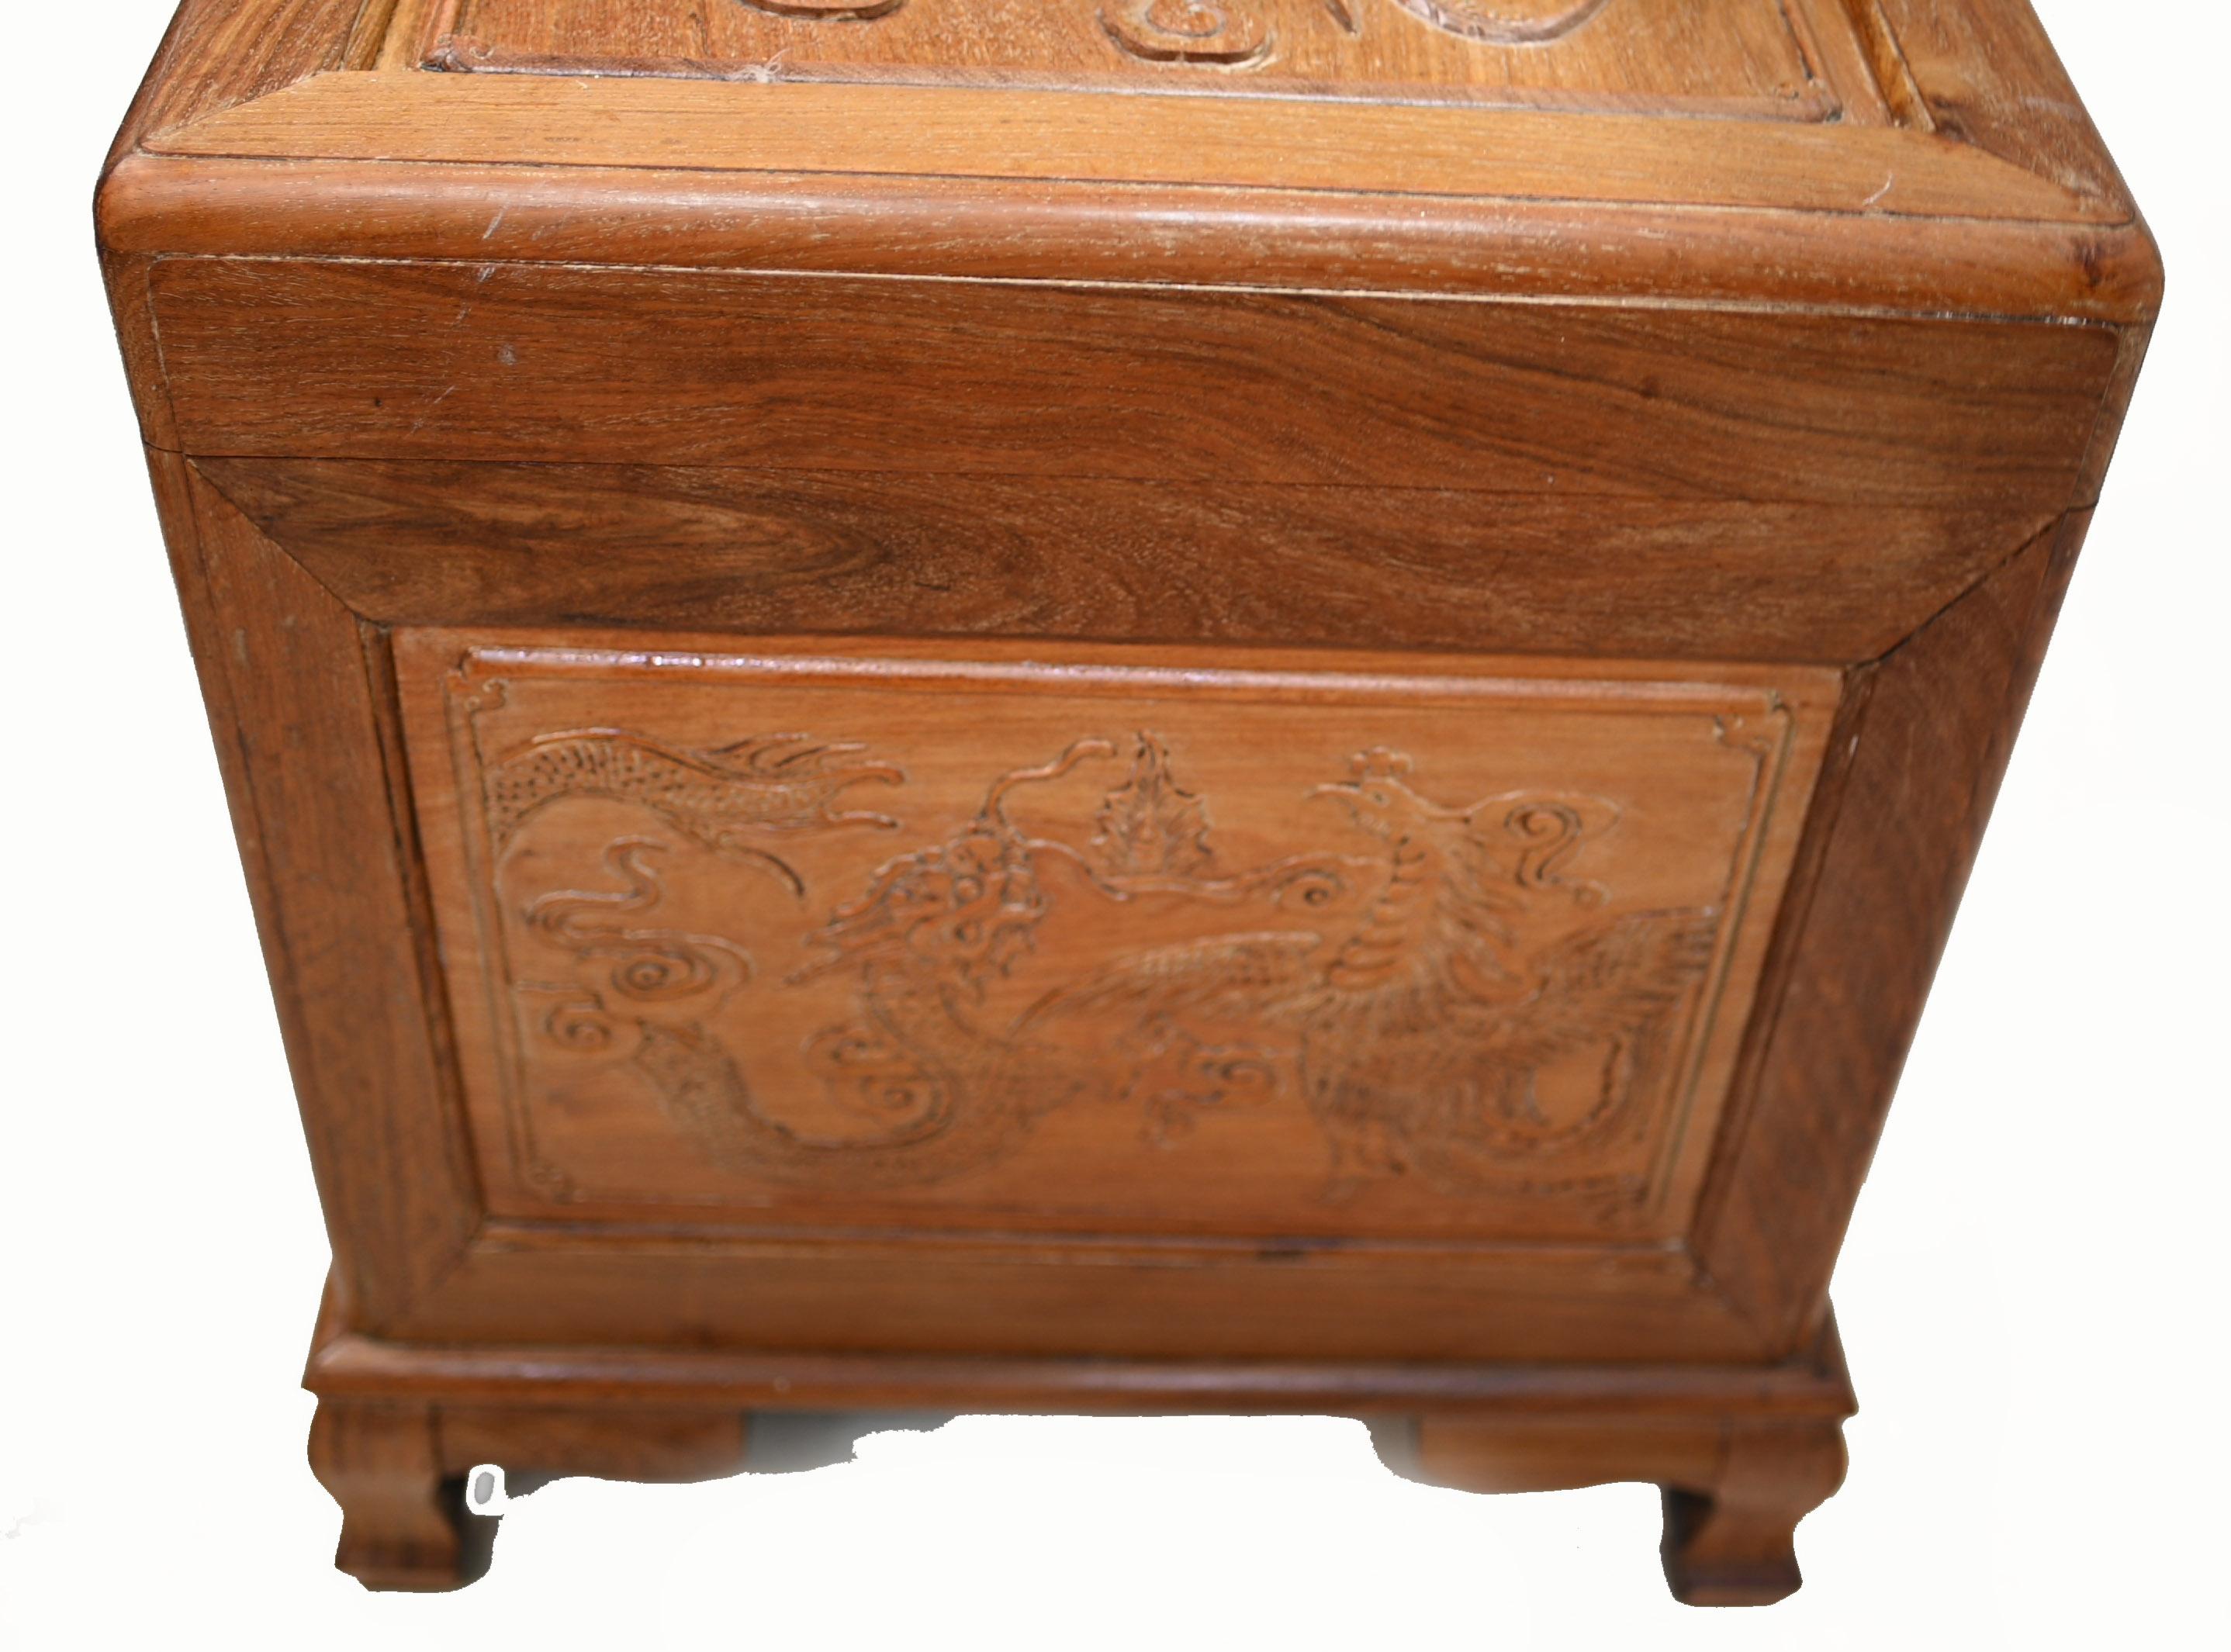 Collectable antique Chinese camphor chest or trunk
We date this to circa 1930 and features profuse carving to the front
Viewing by appointment
Offered in great shape ready for home use right away
We ship to every corner of the planet.
     